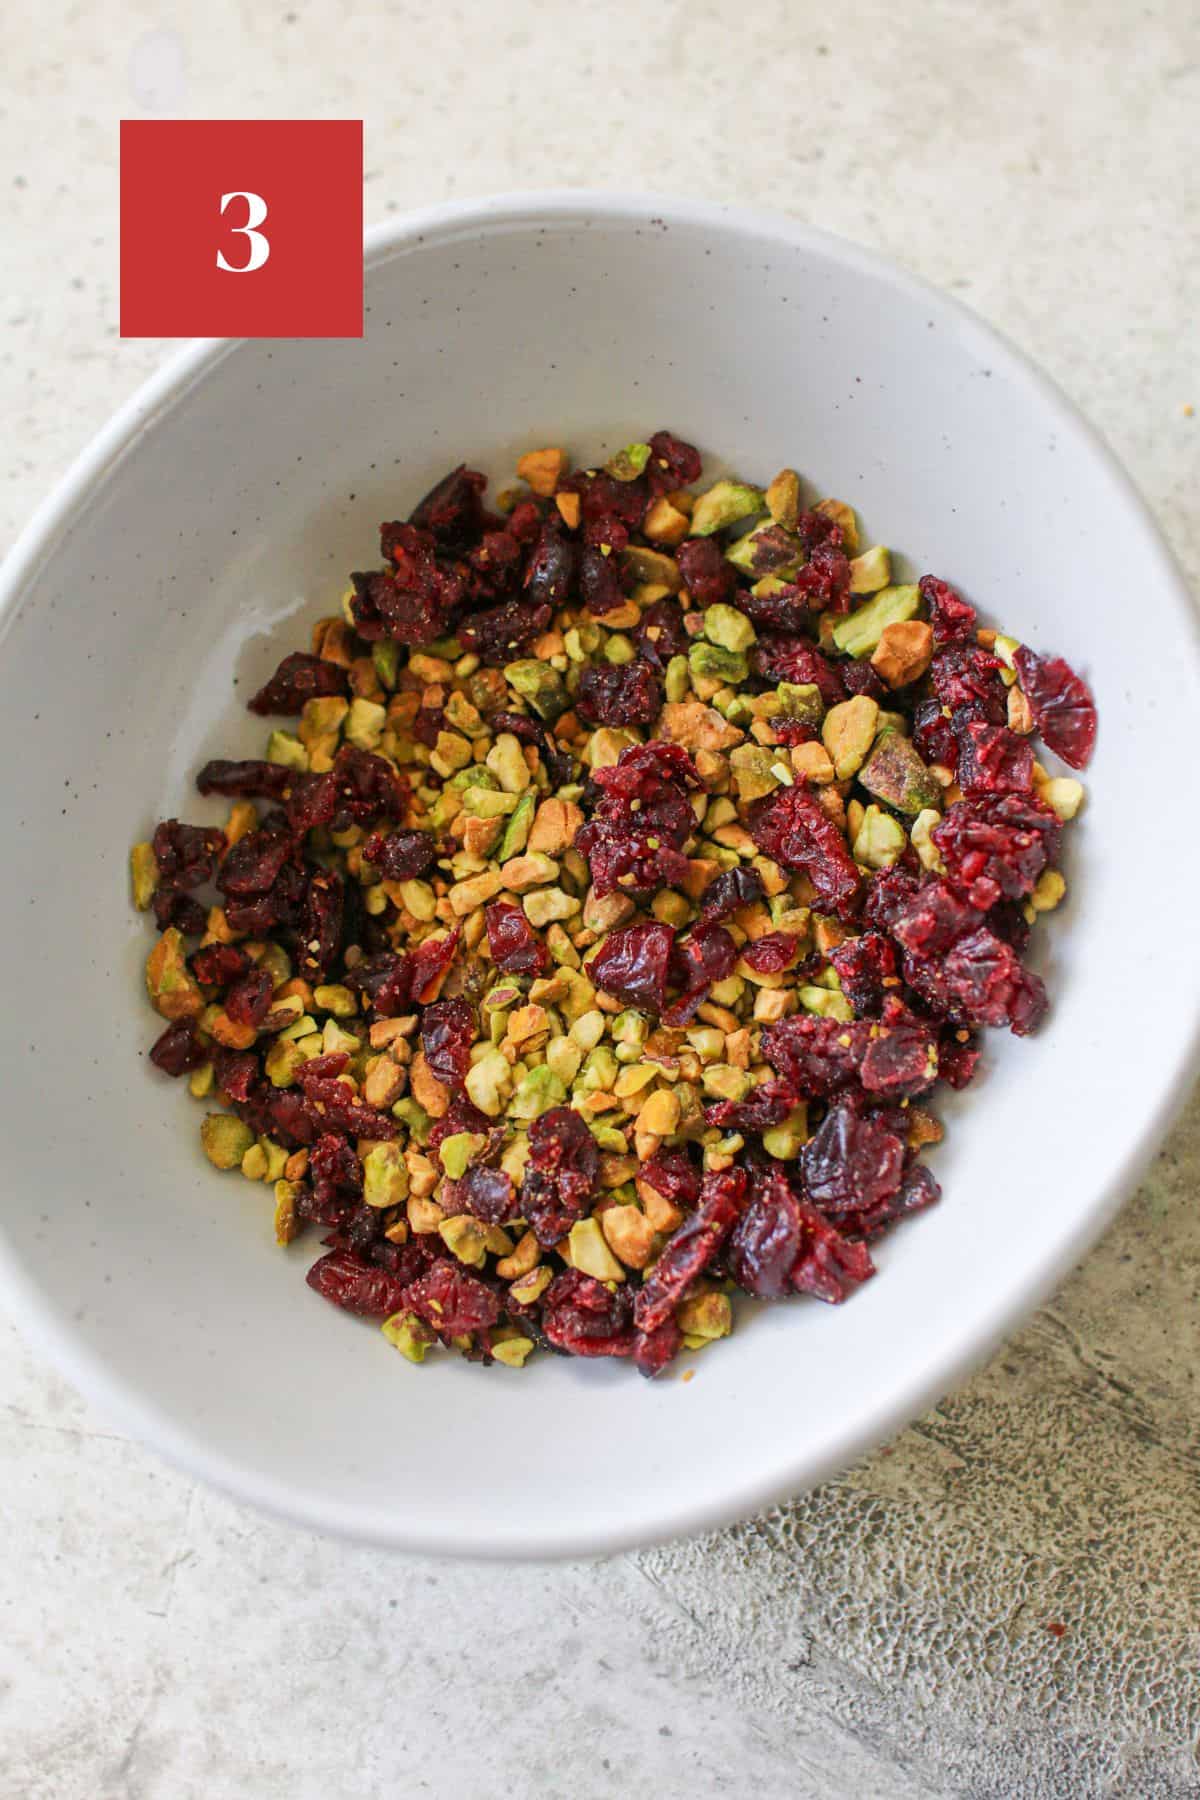 Dried cranberries and chopped pistachios combined in a white bowl on a cement background. In the upper left corner is a dark red square with a white '3' in the center.